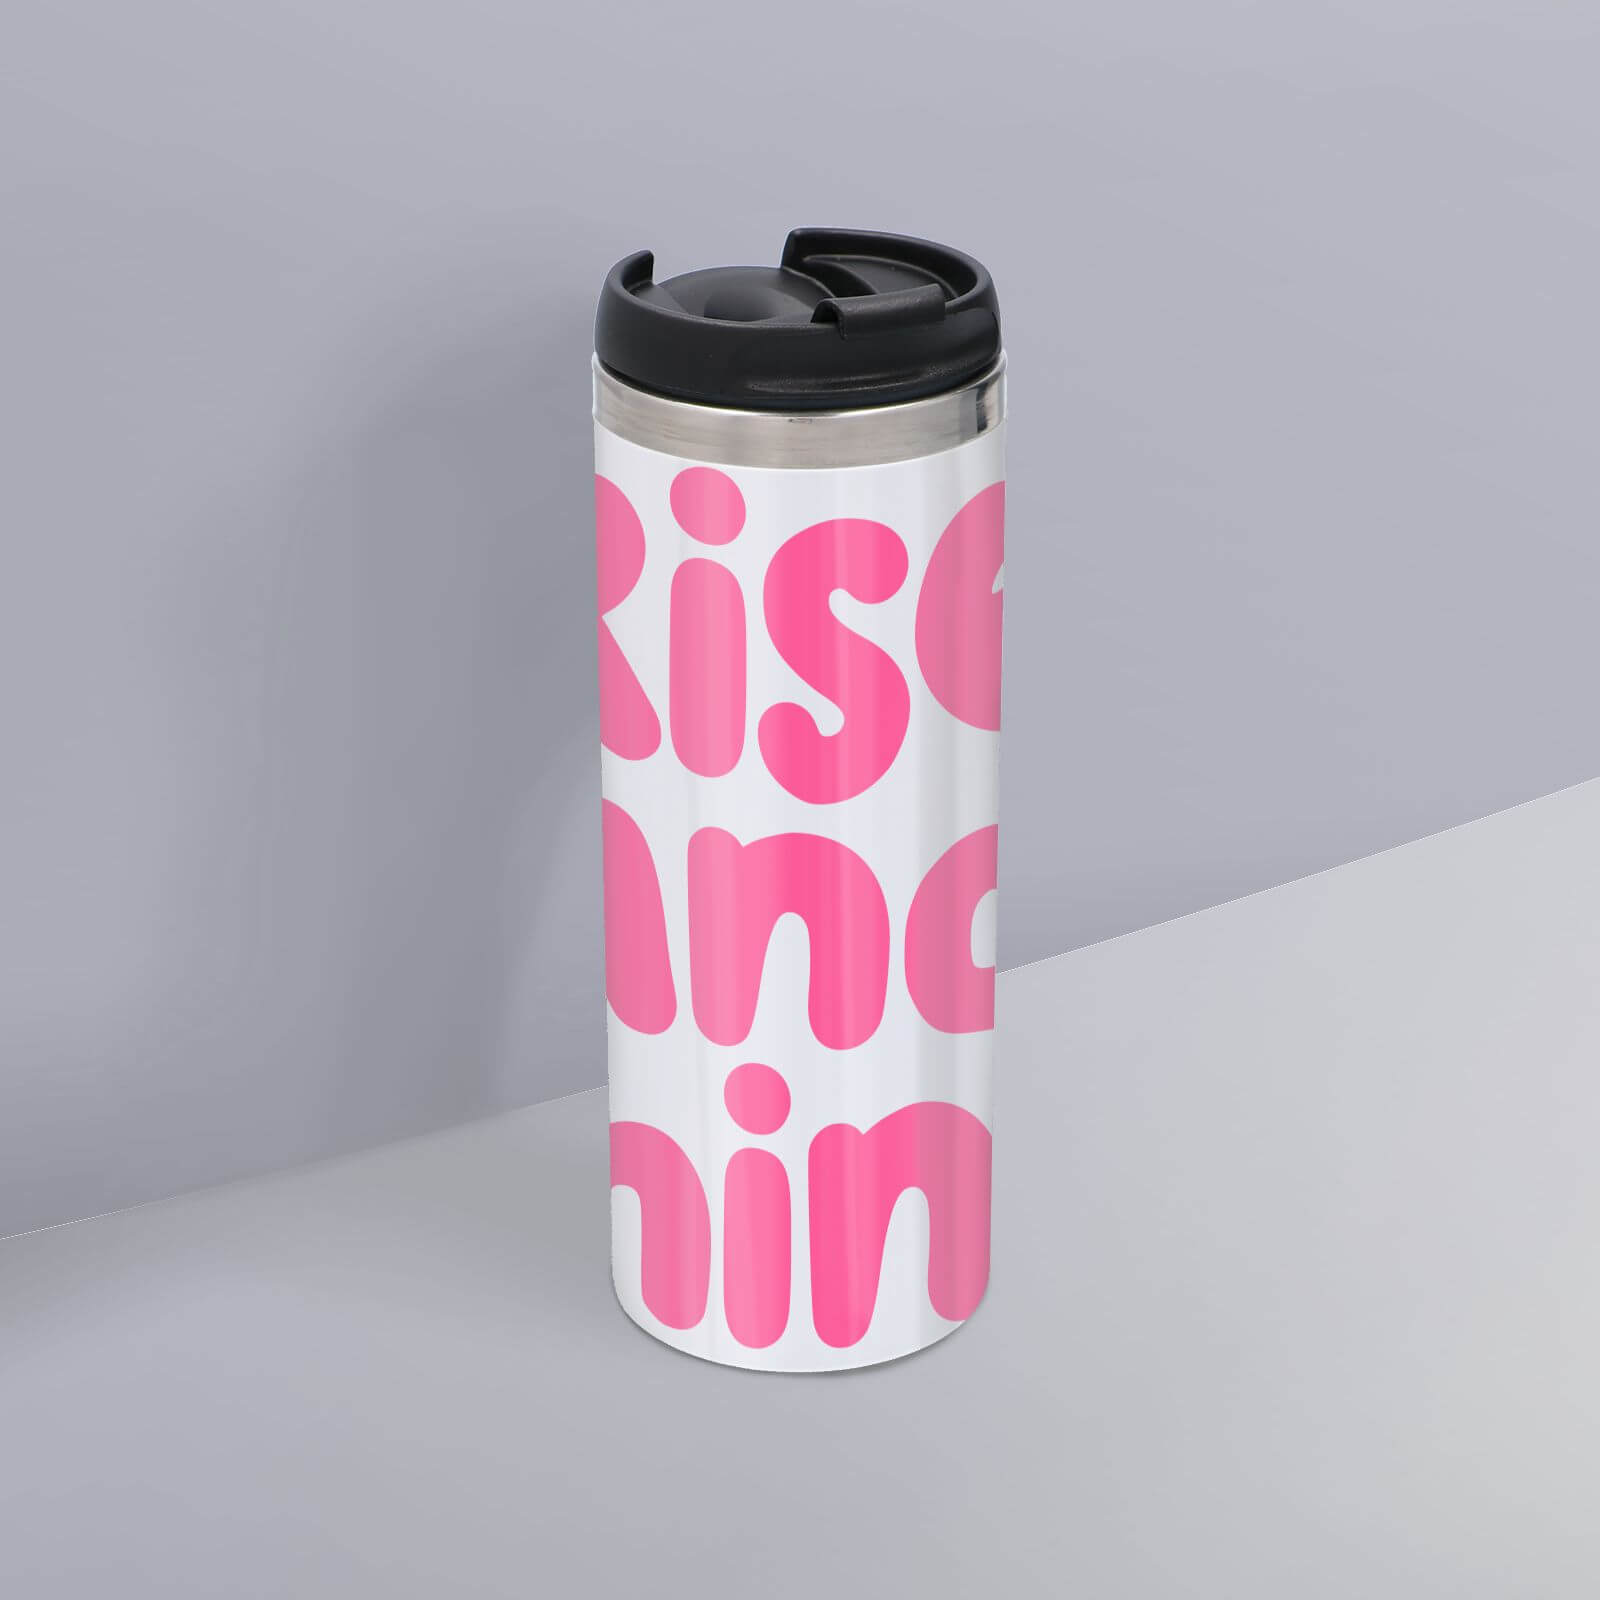 The Motivated Type Rise And Shine Thermo Travel Mug